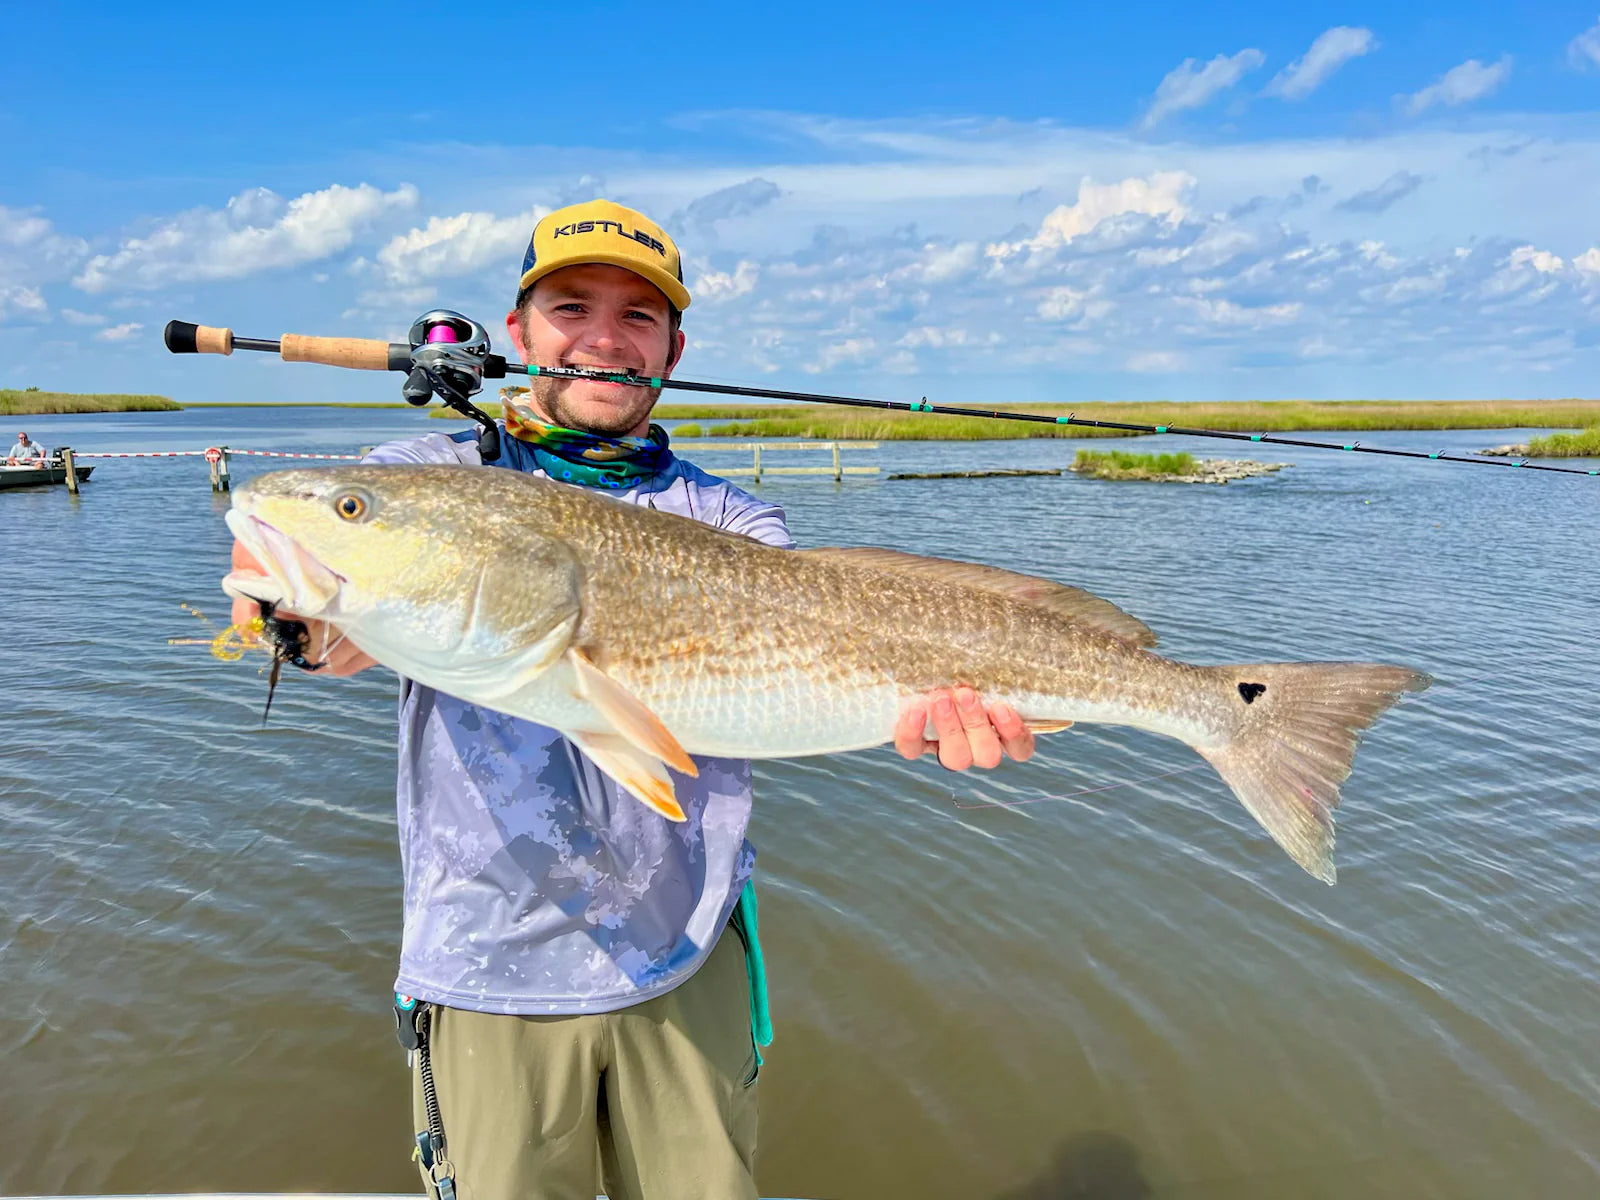 The Kistler Texas Mag Wader Saltwater Rod: The Ultimate Inshore